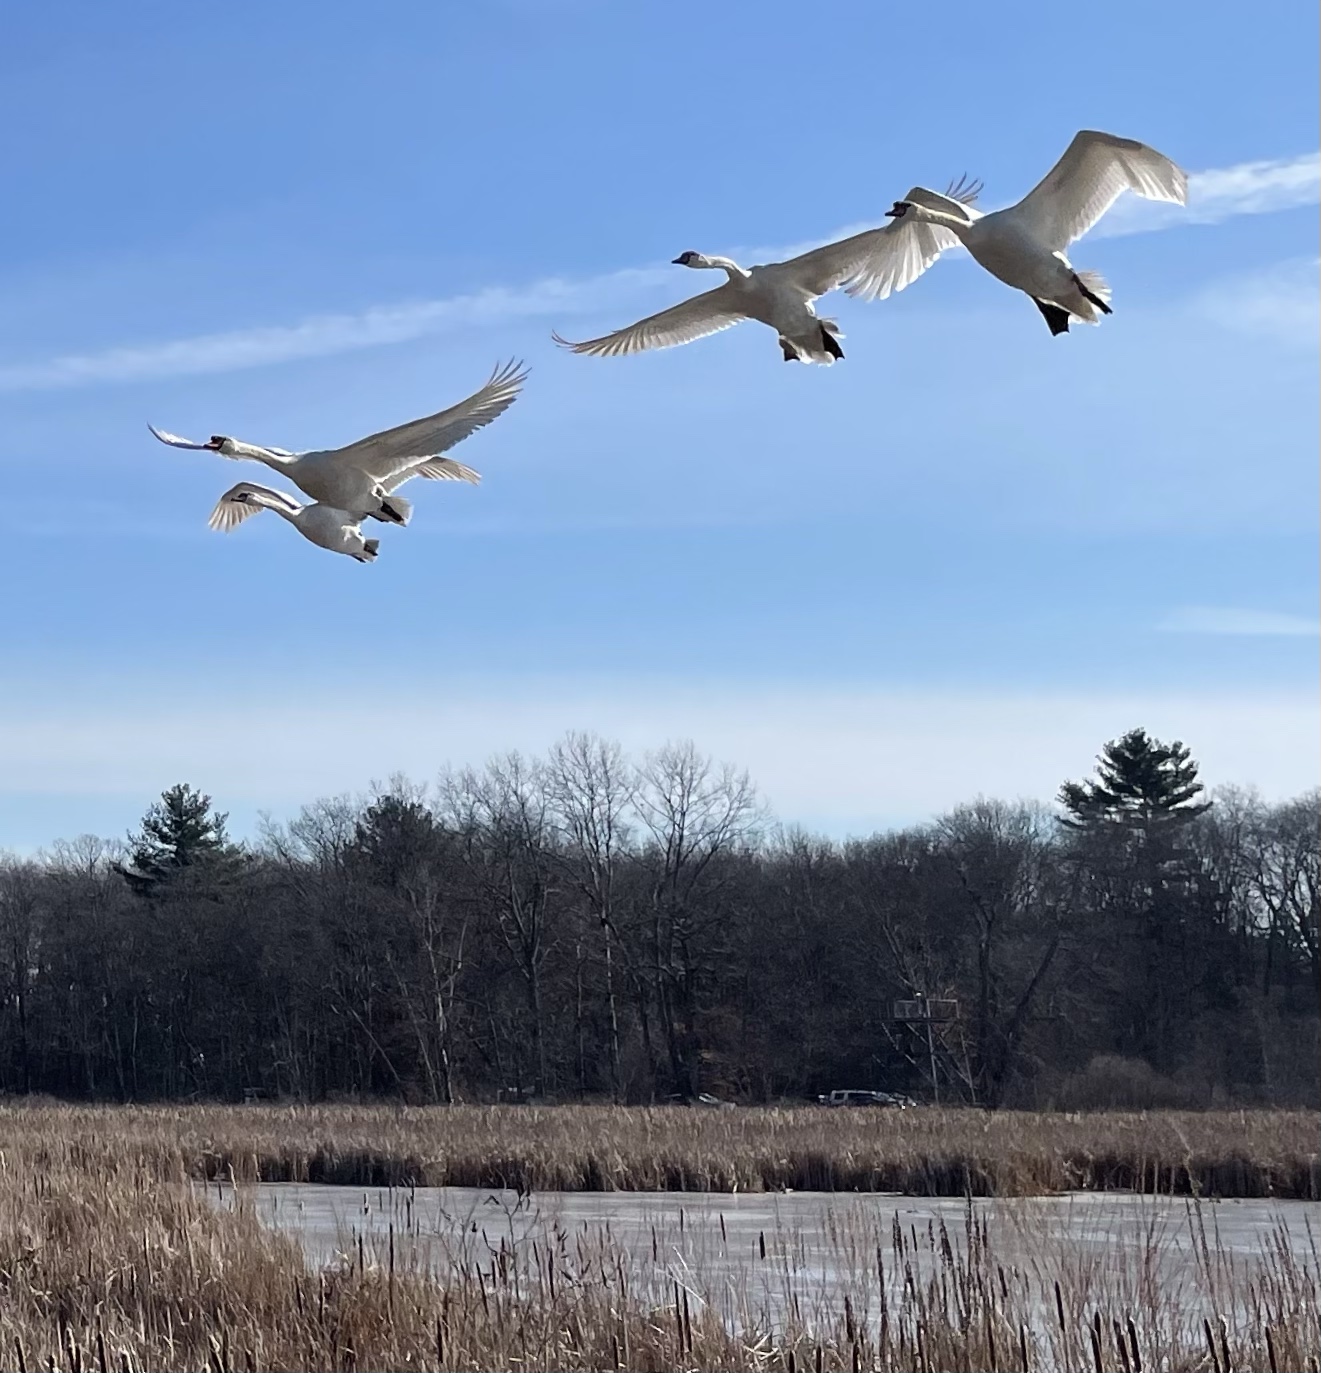 A group of swans flying somewhat majestically